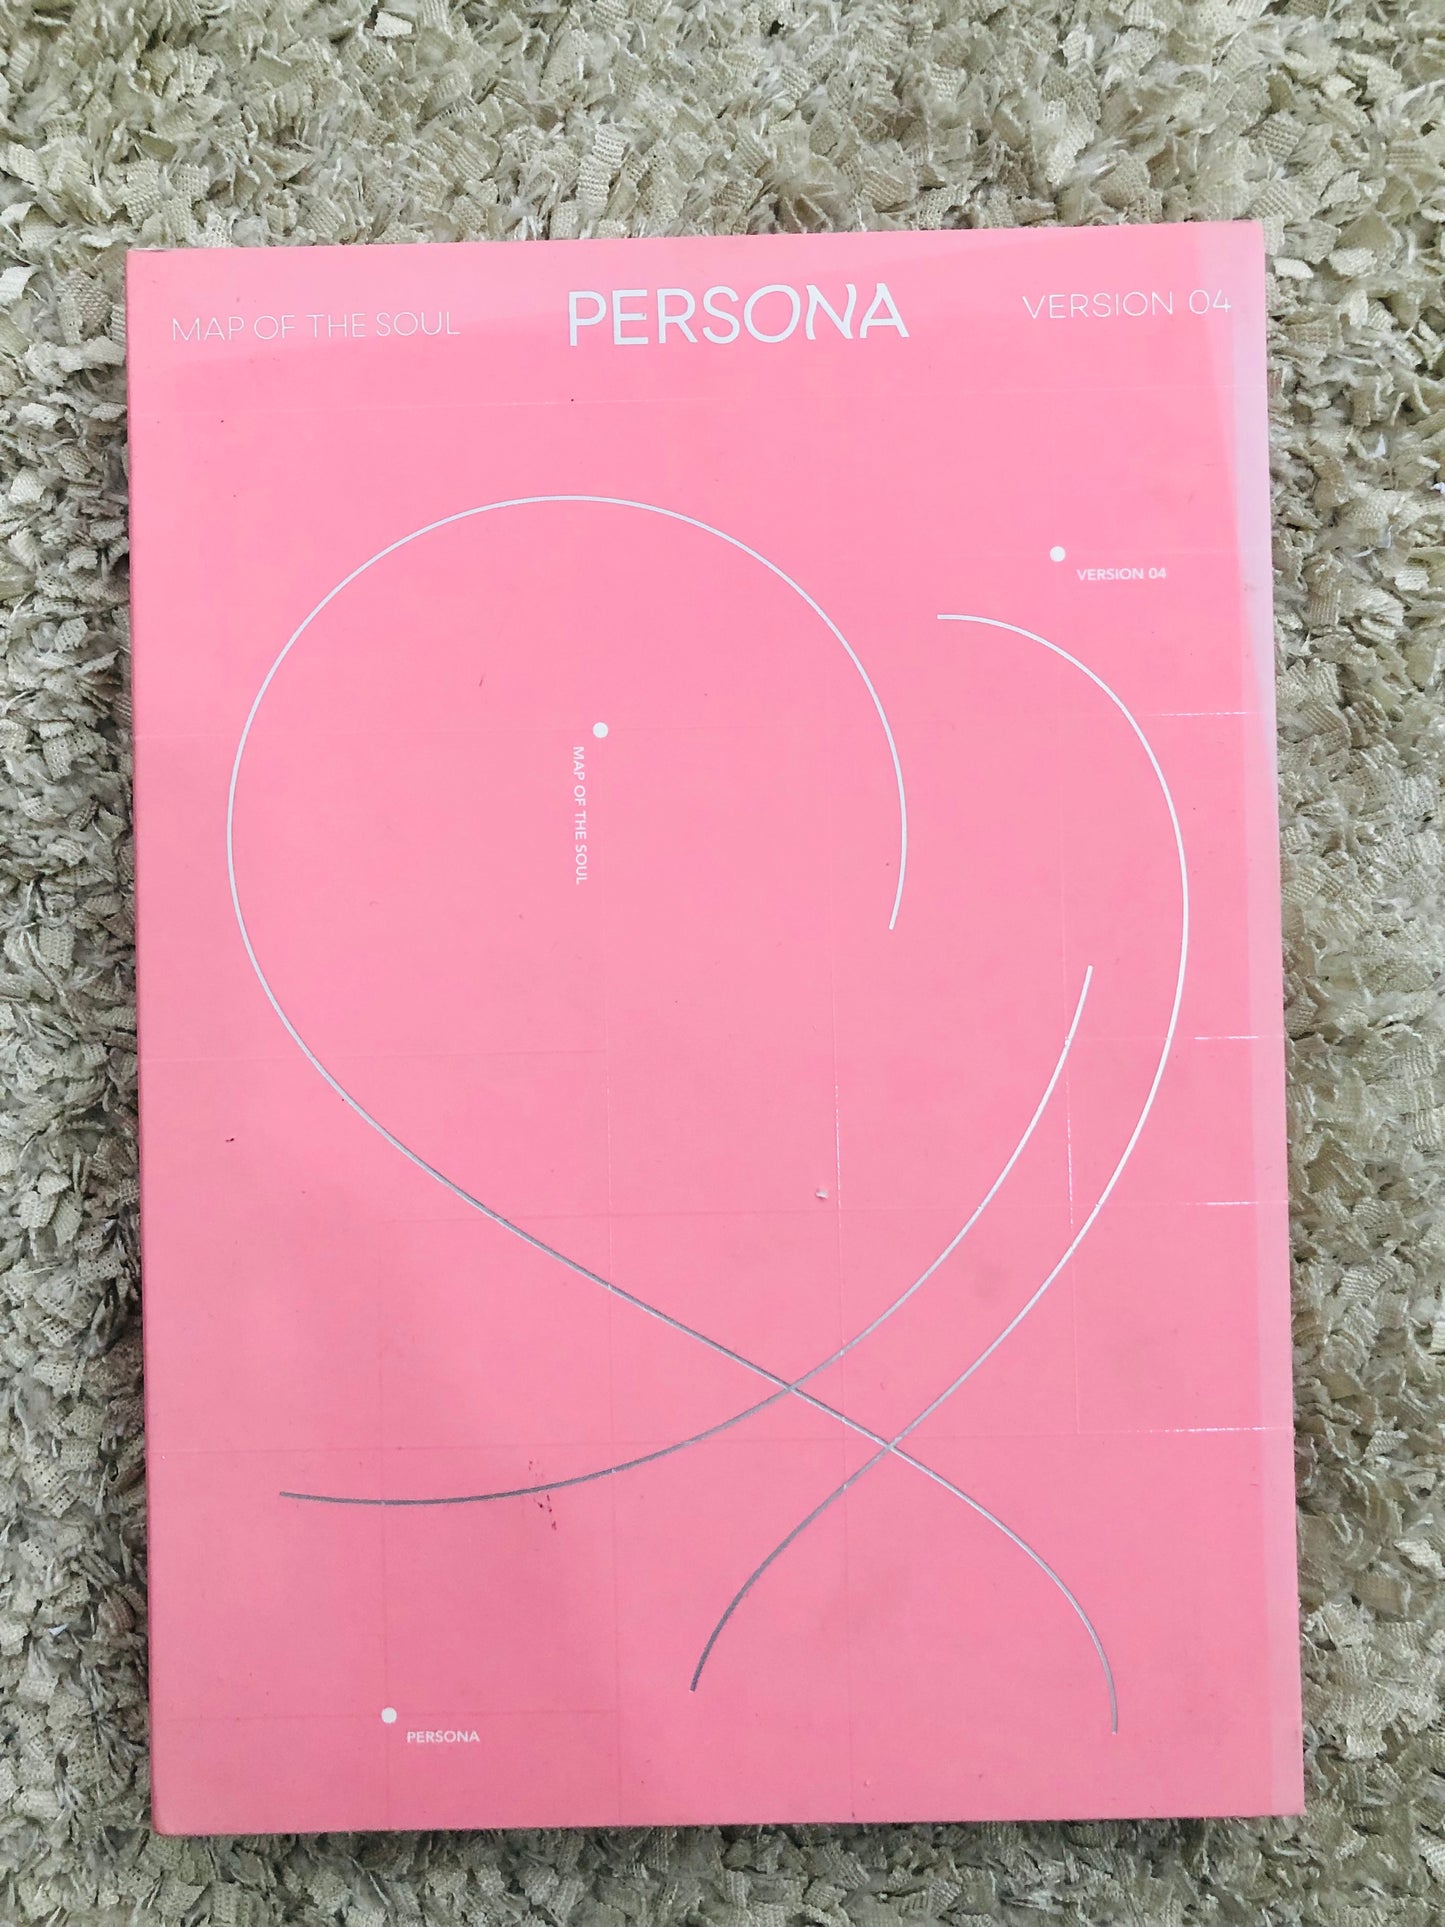 MOTS Persona Official Ver. 4 Album (Opened)